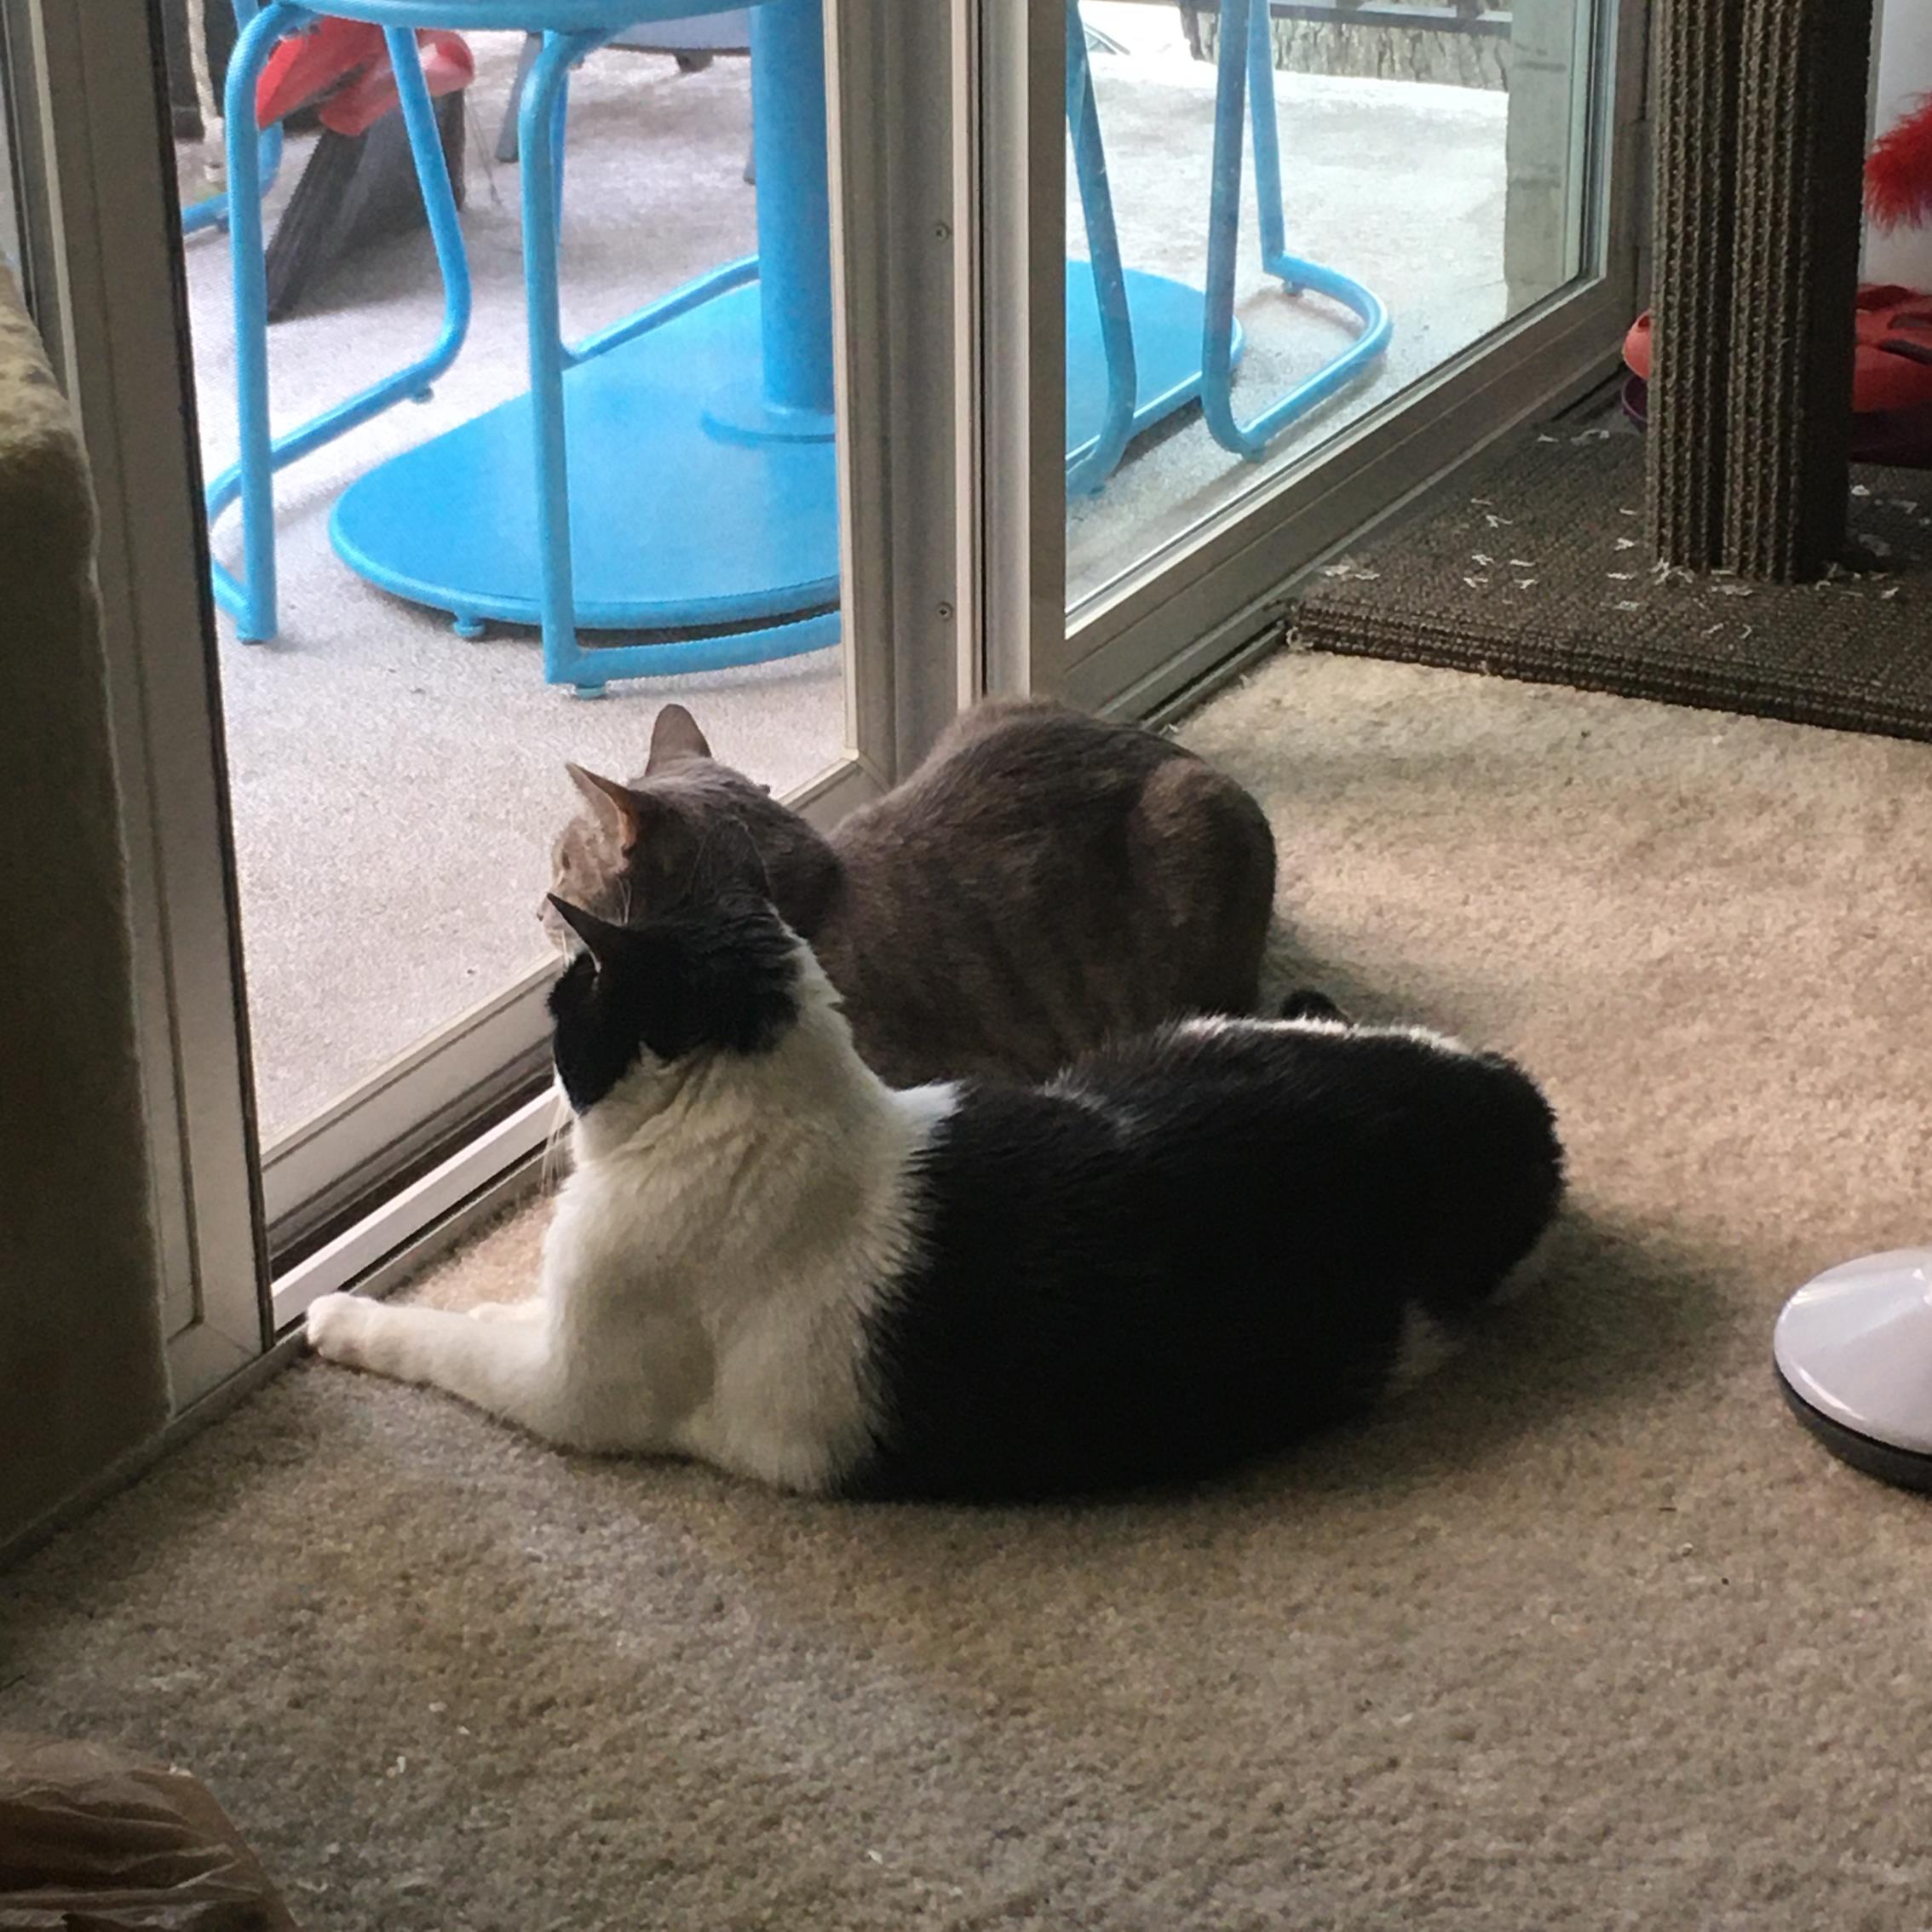 Watching the world together, best friends. 